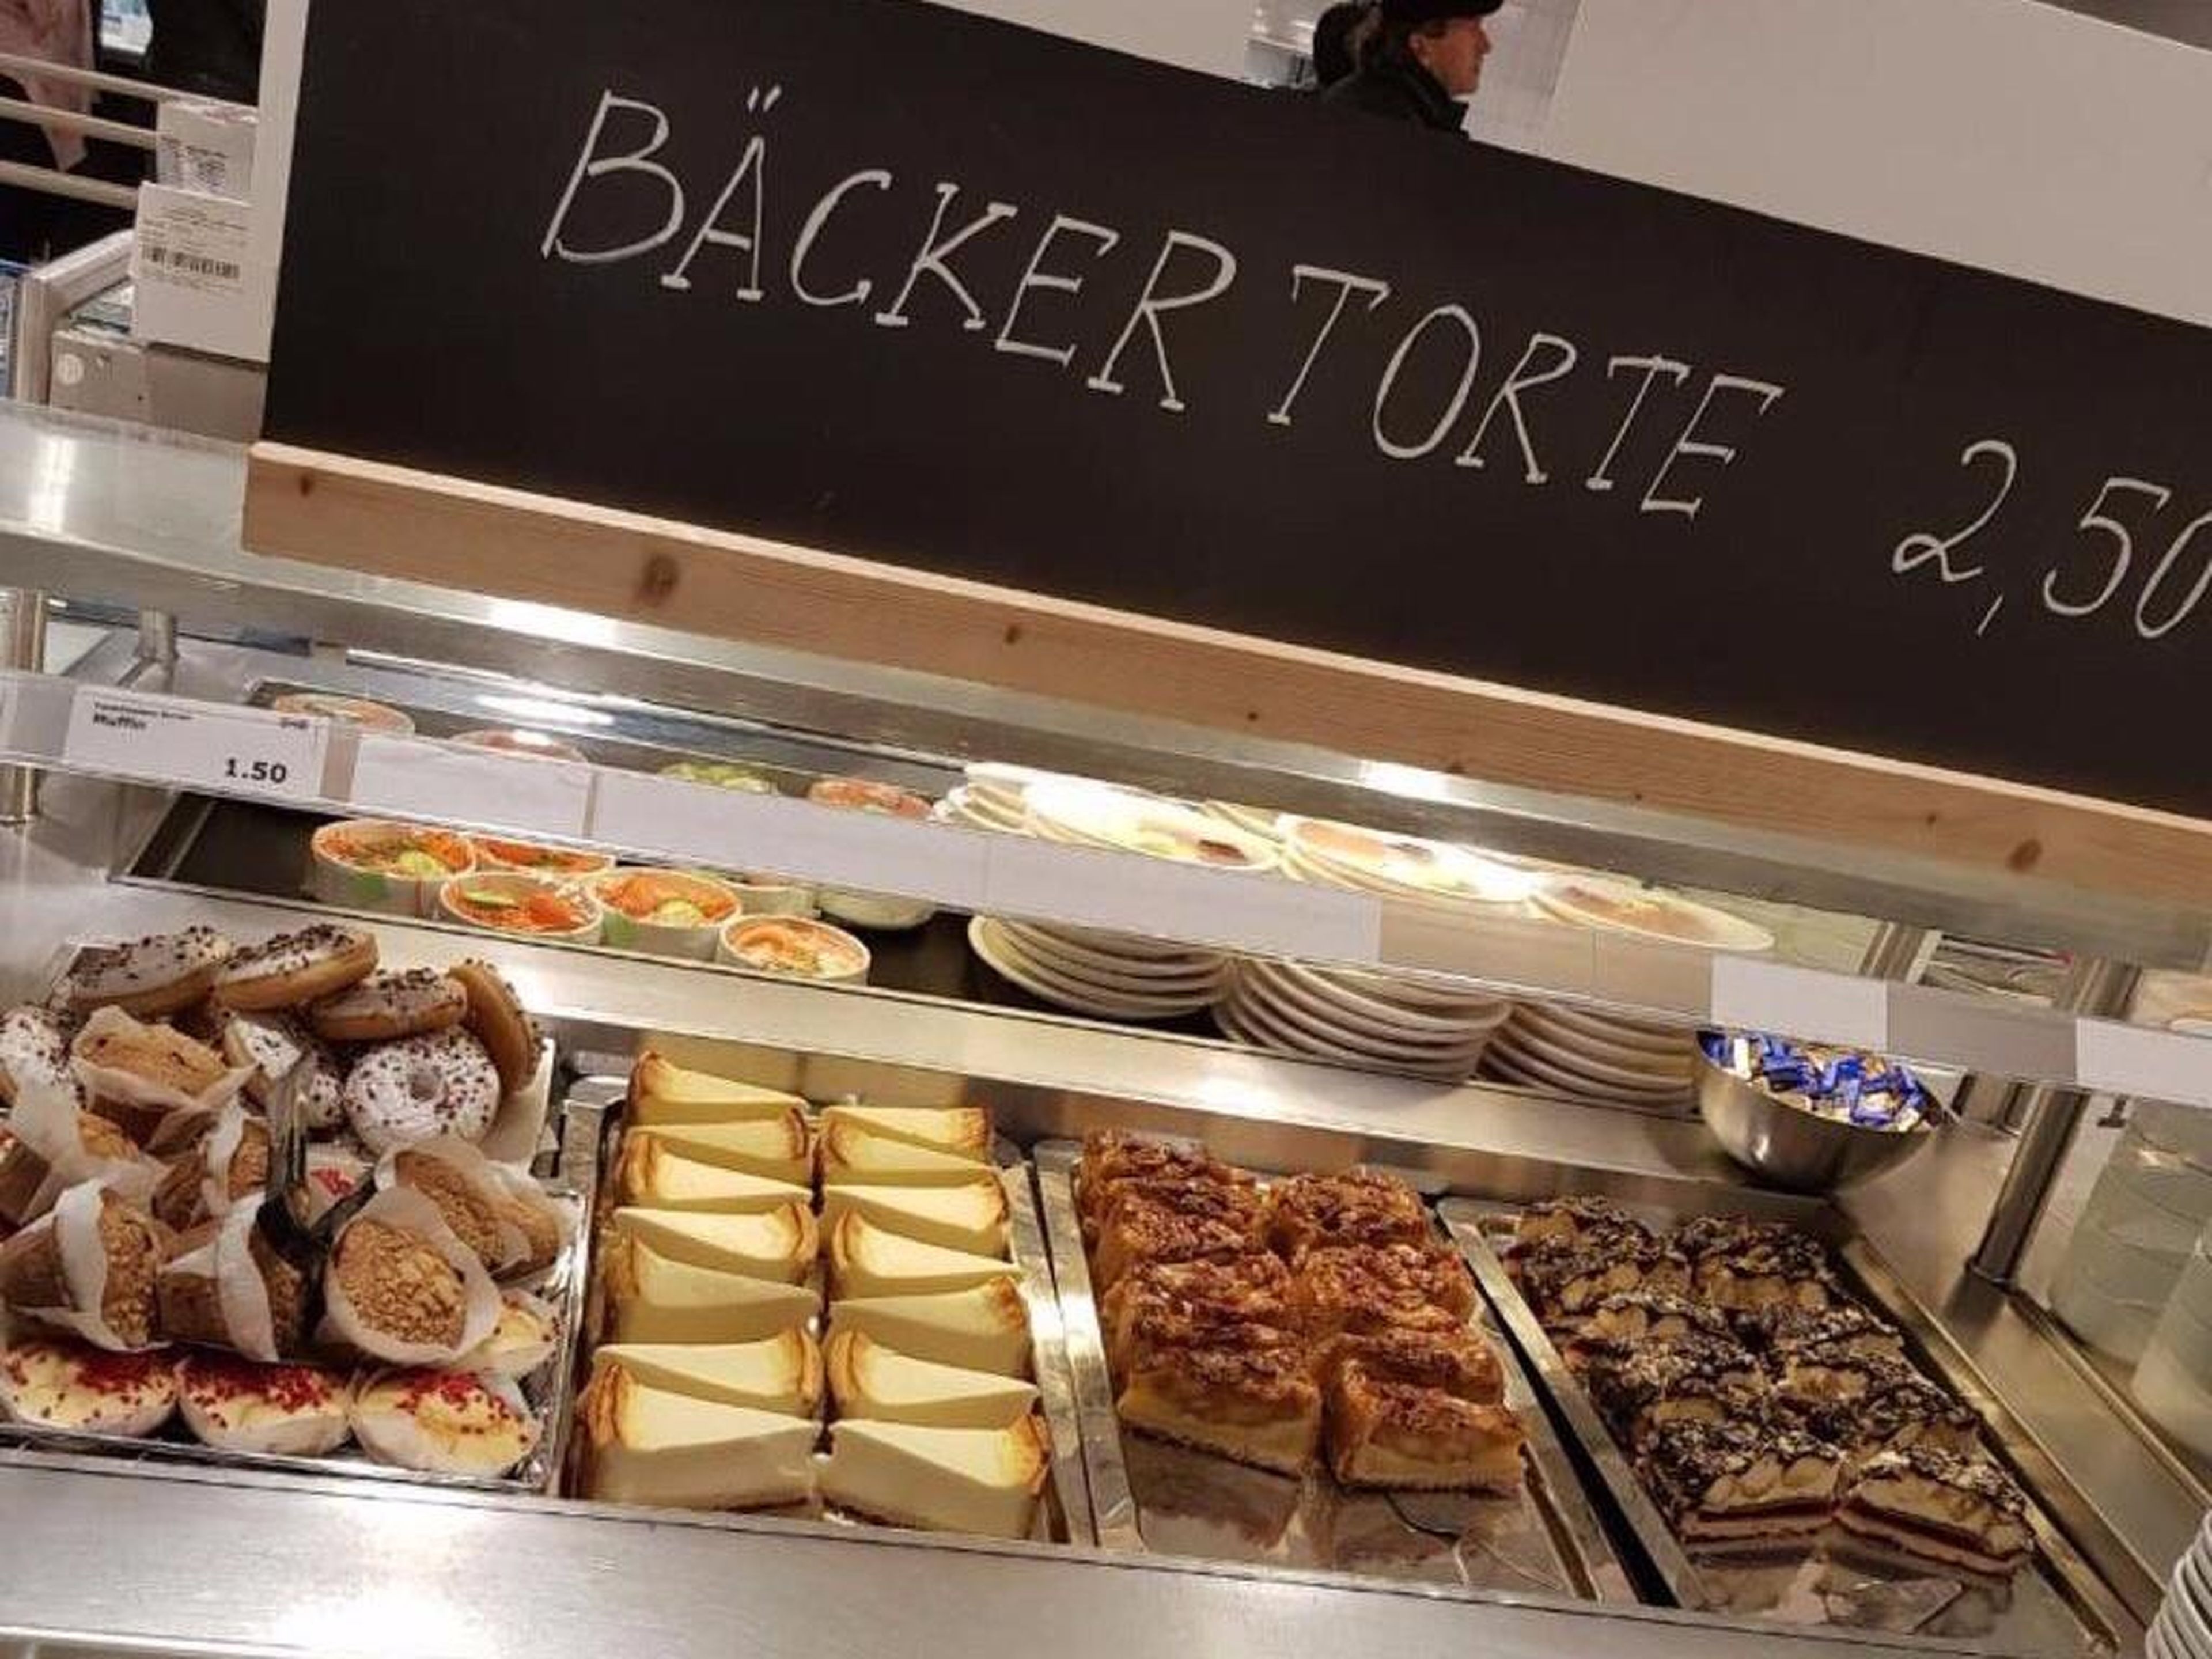 An IKEA in Germany offers a vast selection of desserts, including pastries, muffins, and different cakes.